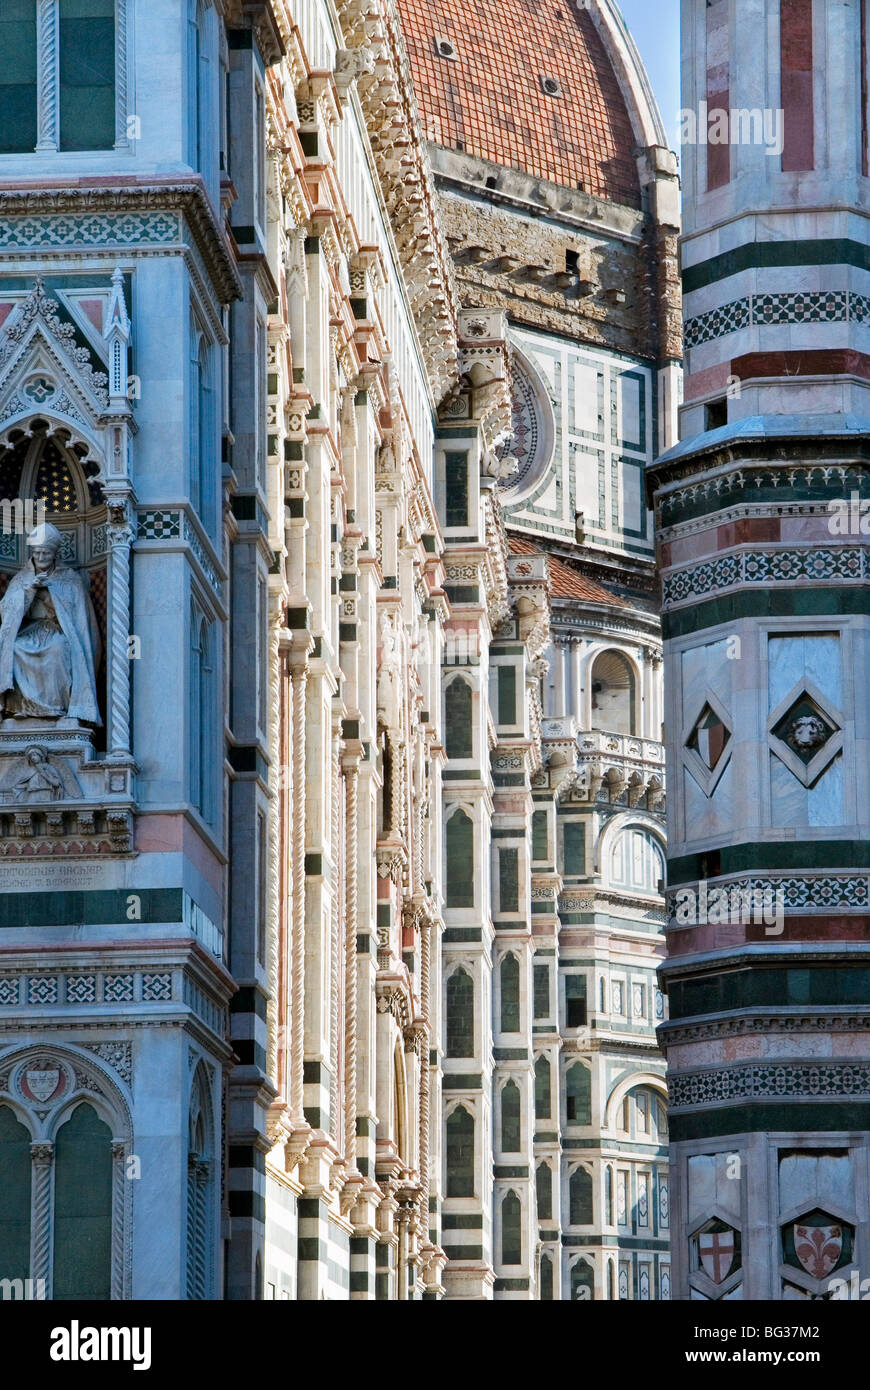 The Duomo (cathedral) , Florence (Firenze), UNESCO World Heritage Site, Tuscany, Italy, Europe Stock Photo